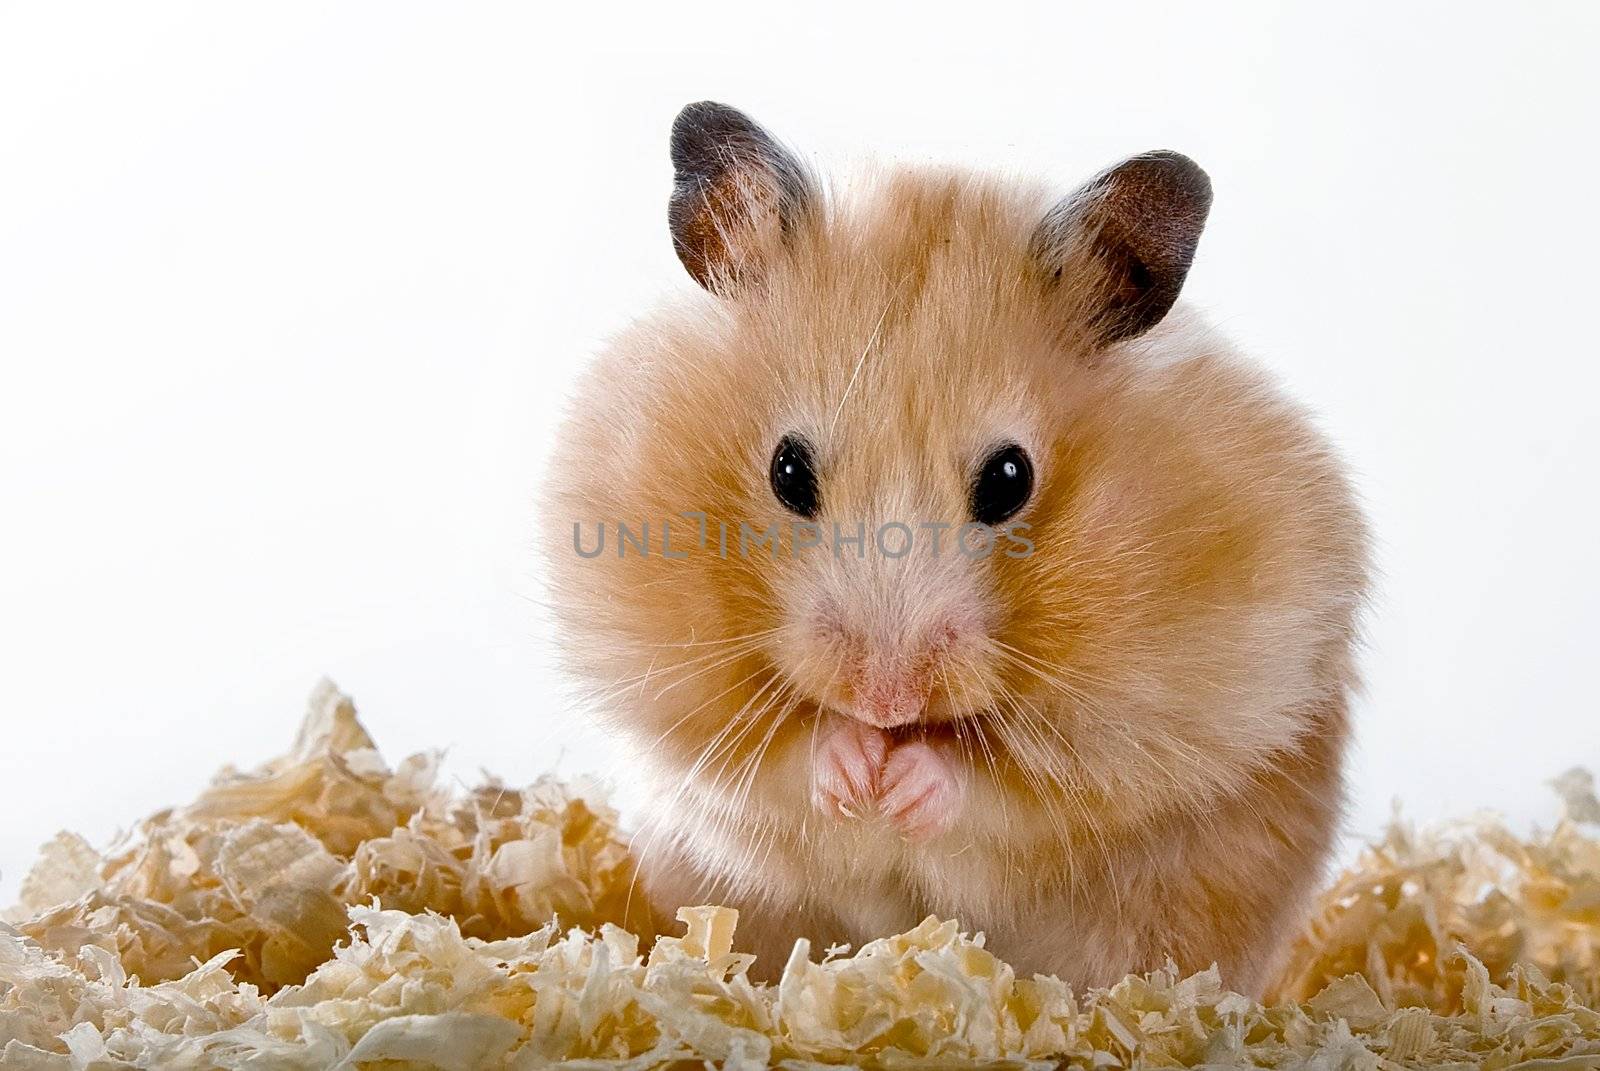 Hamster on sawdust on a white background